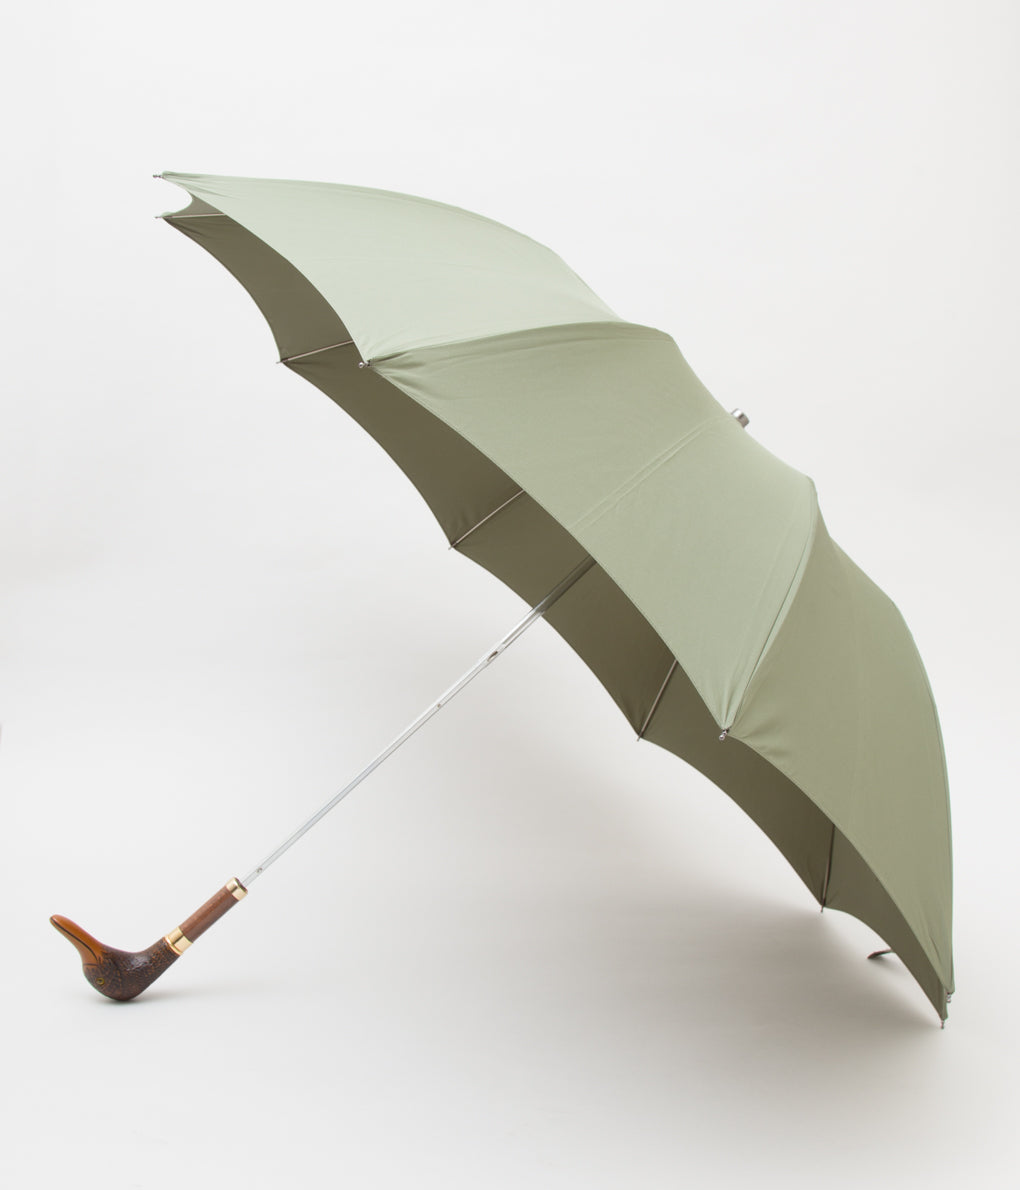 brutalt Påstand trist FOX UMBRELLAS "EXCLUSIVE TL1/MAPLE ANIMAL HANDLE" (DUCK) – THE STORE BY  MAIDENS